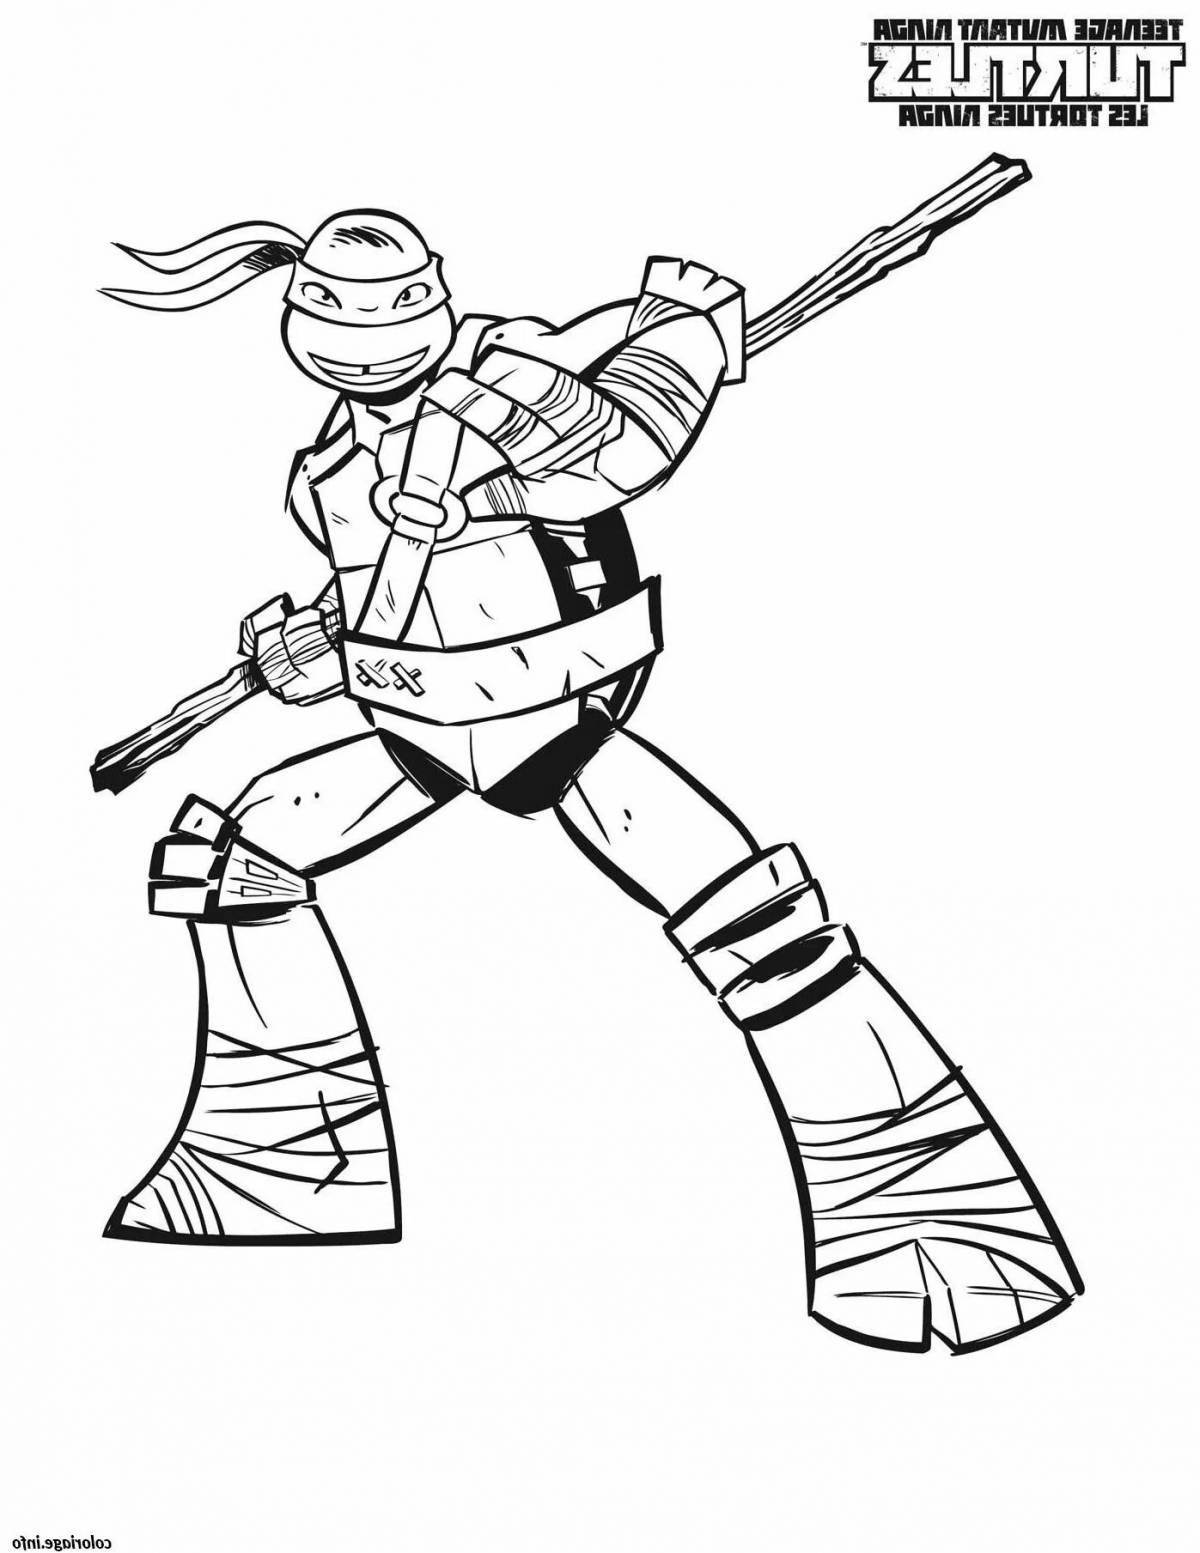 Coloring page shining ninja turtles donnie